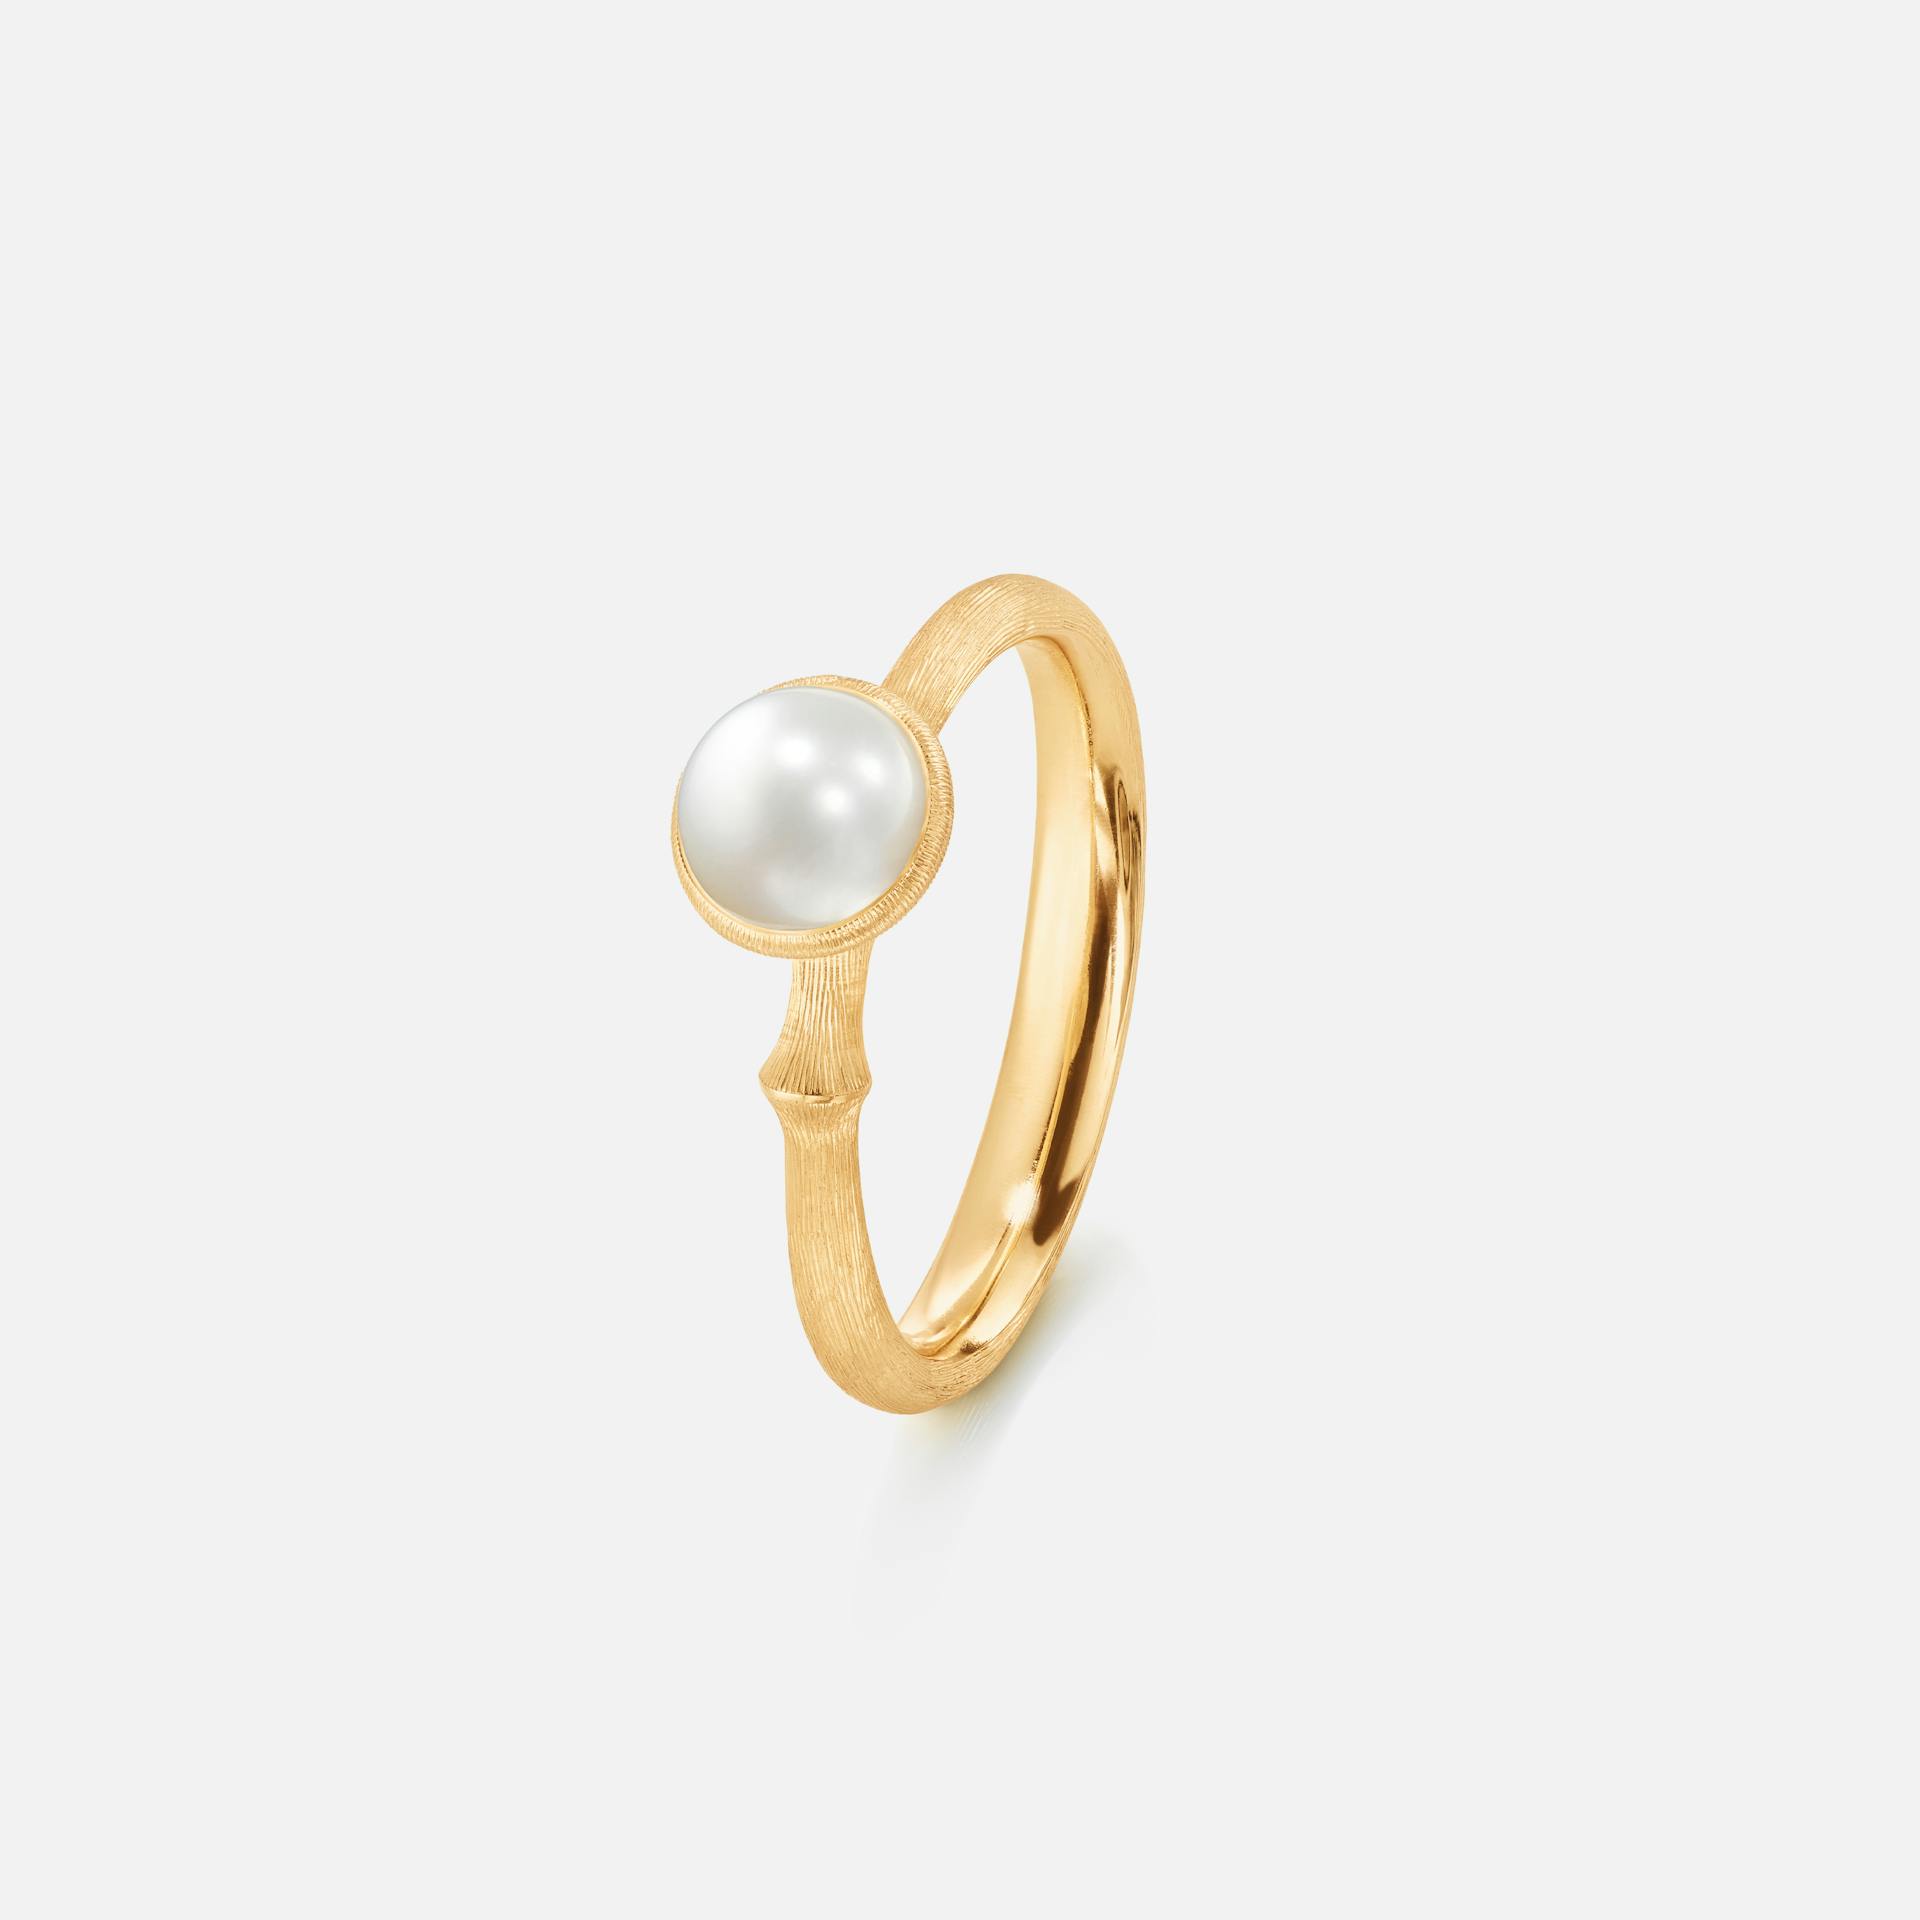 Lotus Ring size 0 in 18 Karat Yellow Gold with a White Pearl  |  Ole Lynggaard Copenhagen